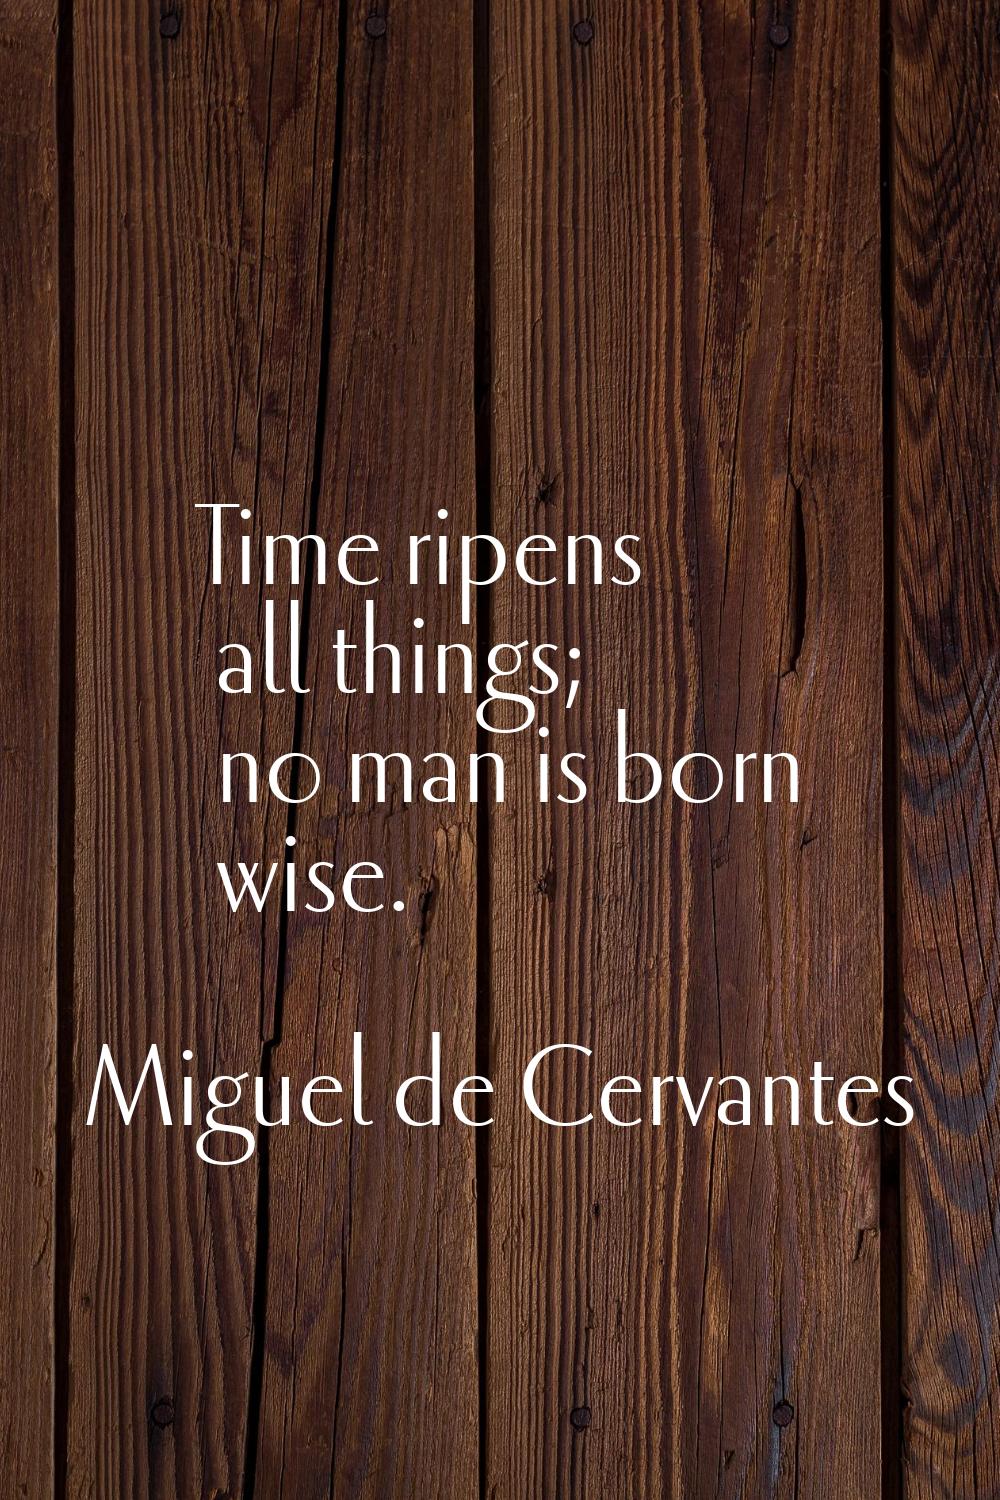 Time ripens all things; no man is born wise.